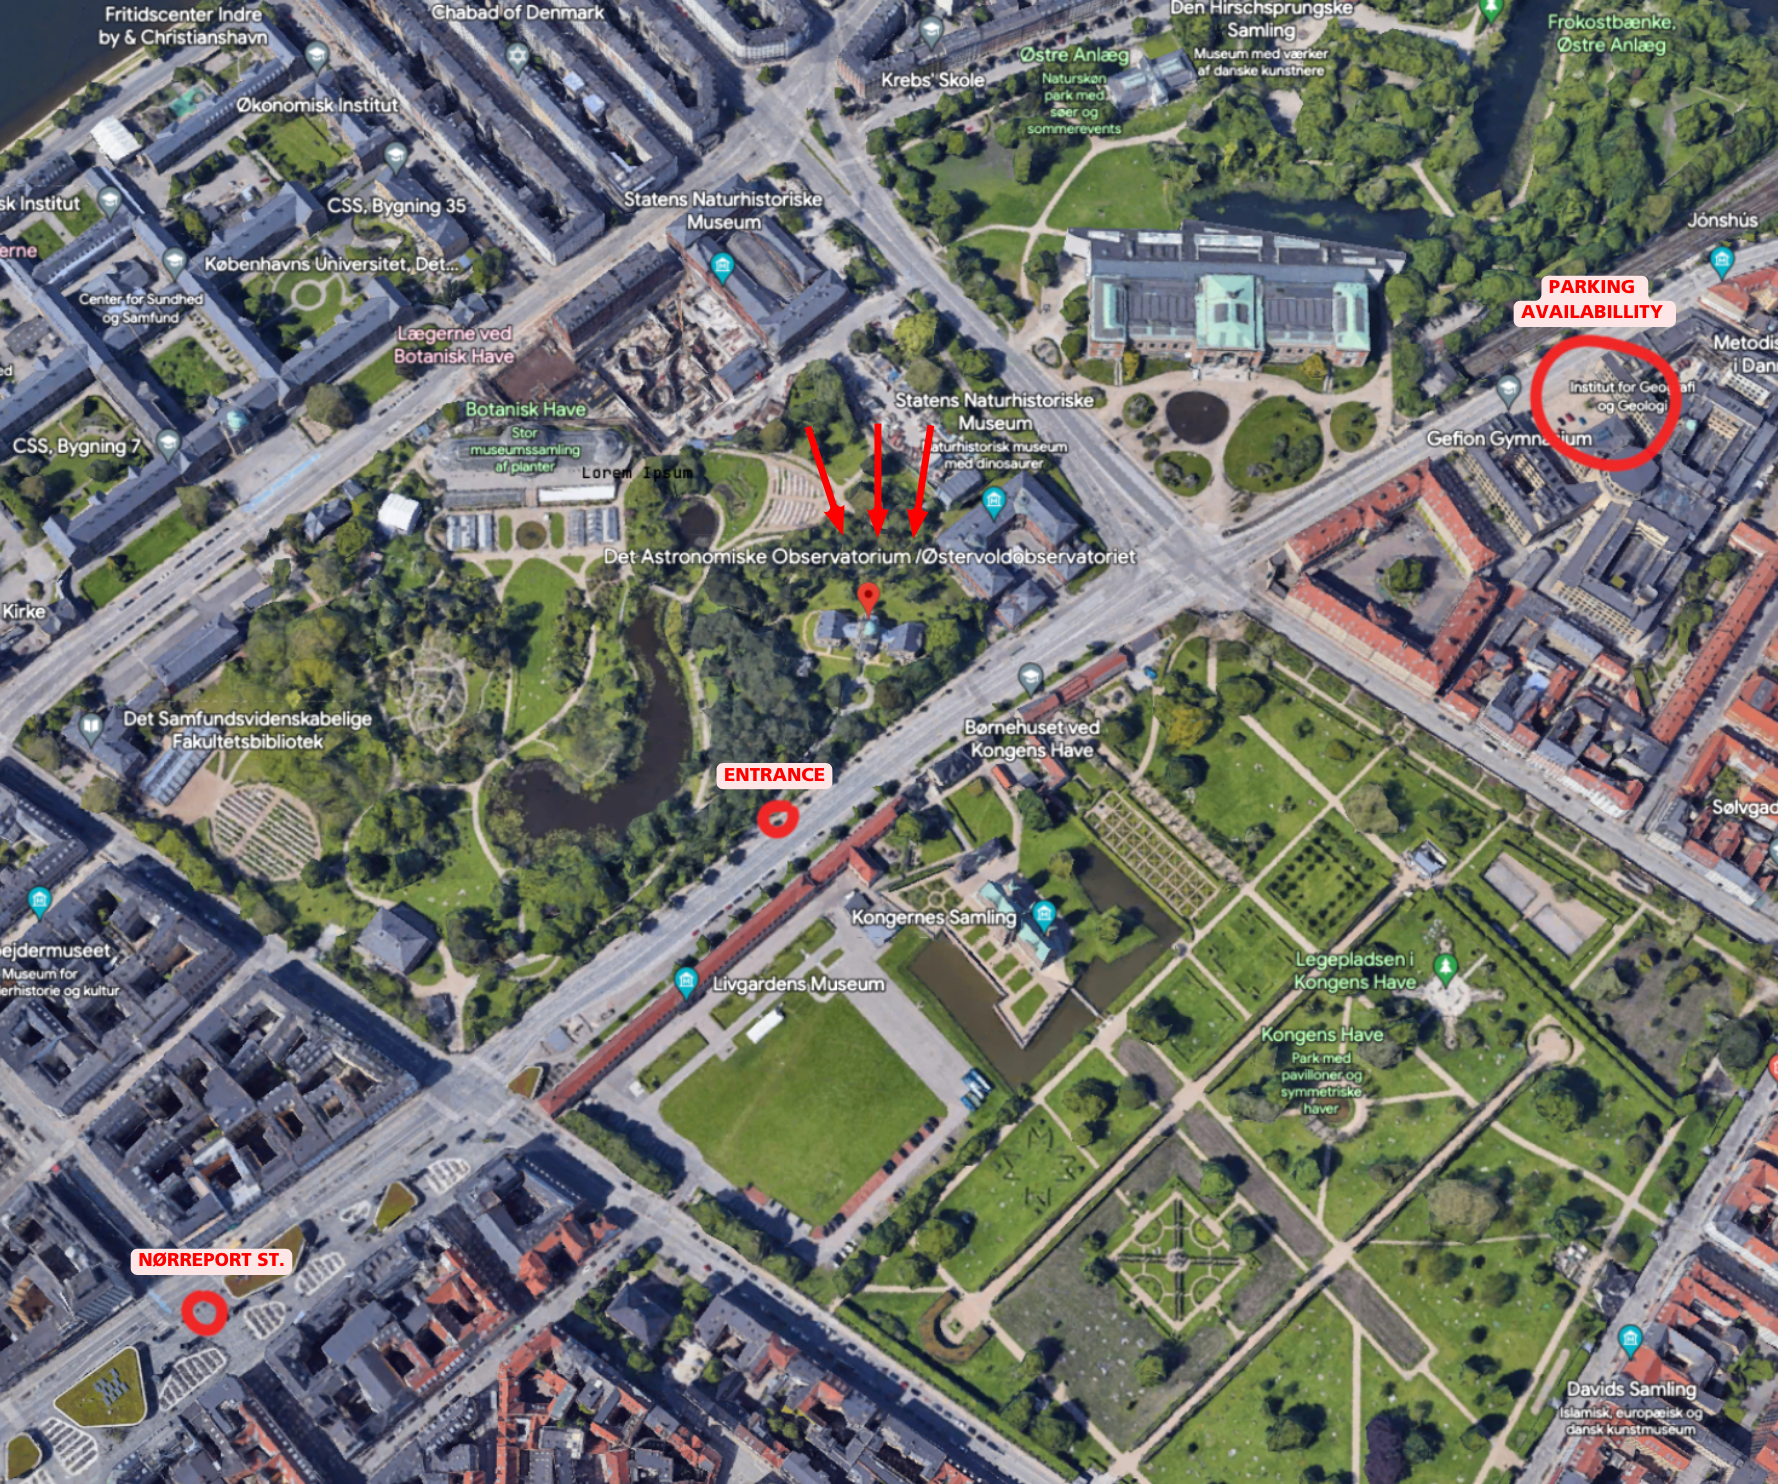 Aerial view, Pioneer Centre AI in relation to Nørreport St. and parking at Øster Voldgade 10